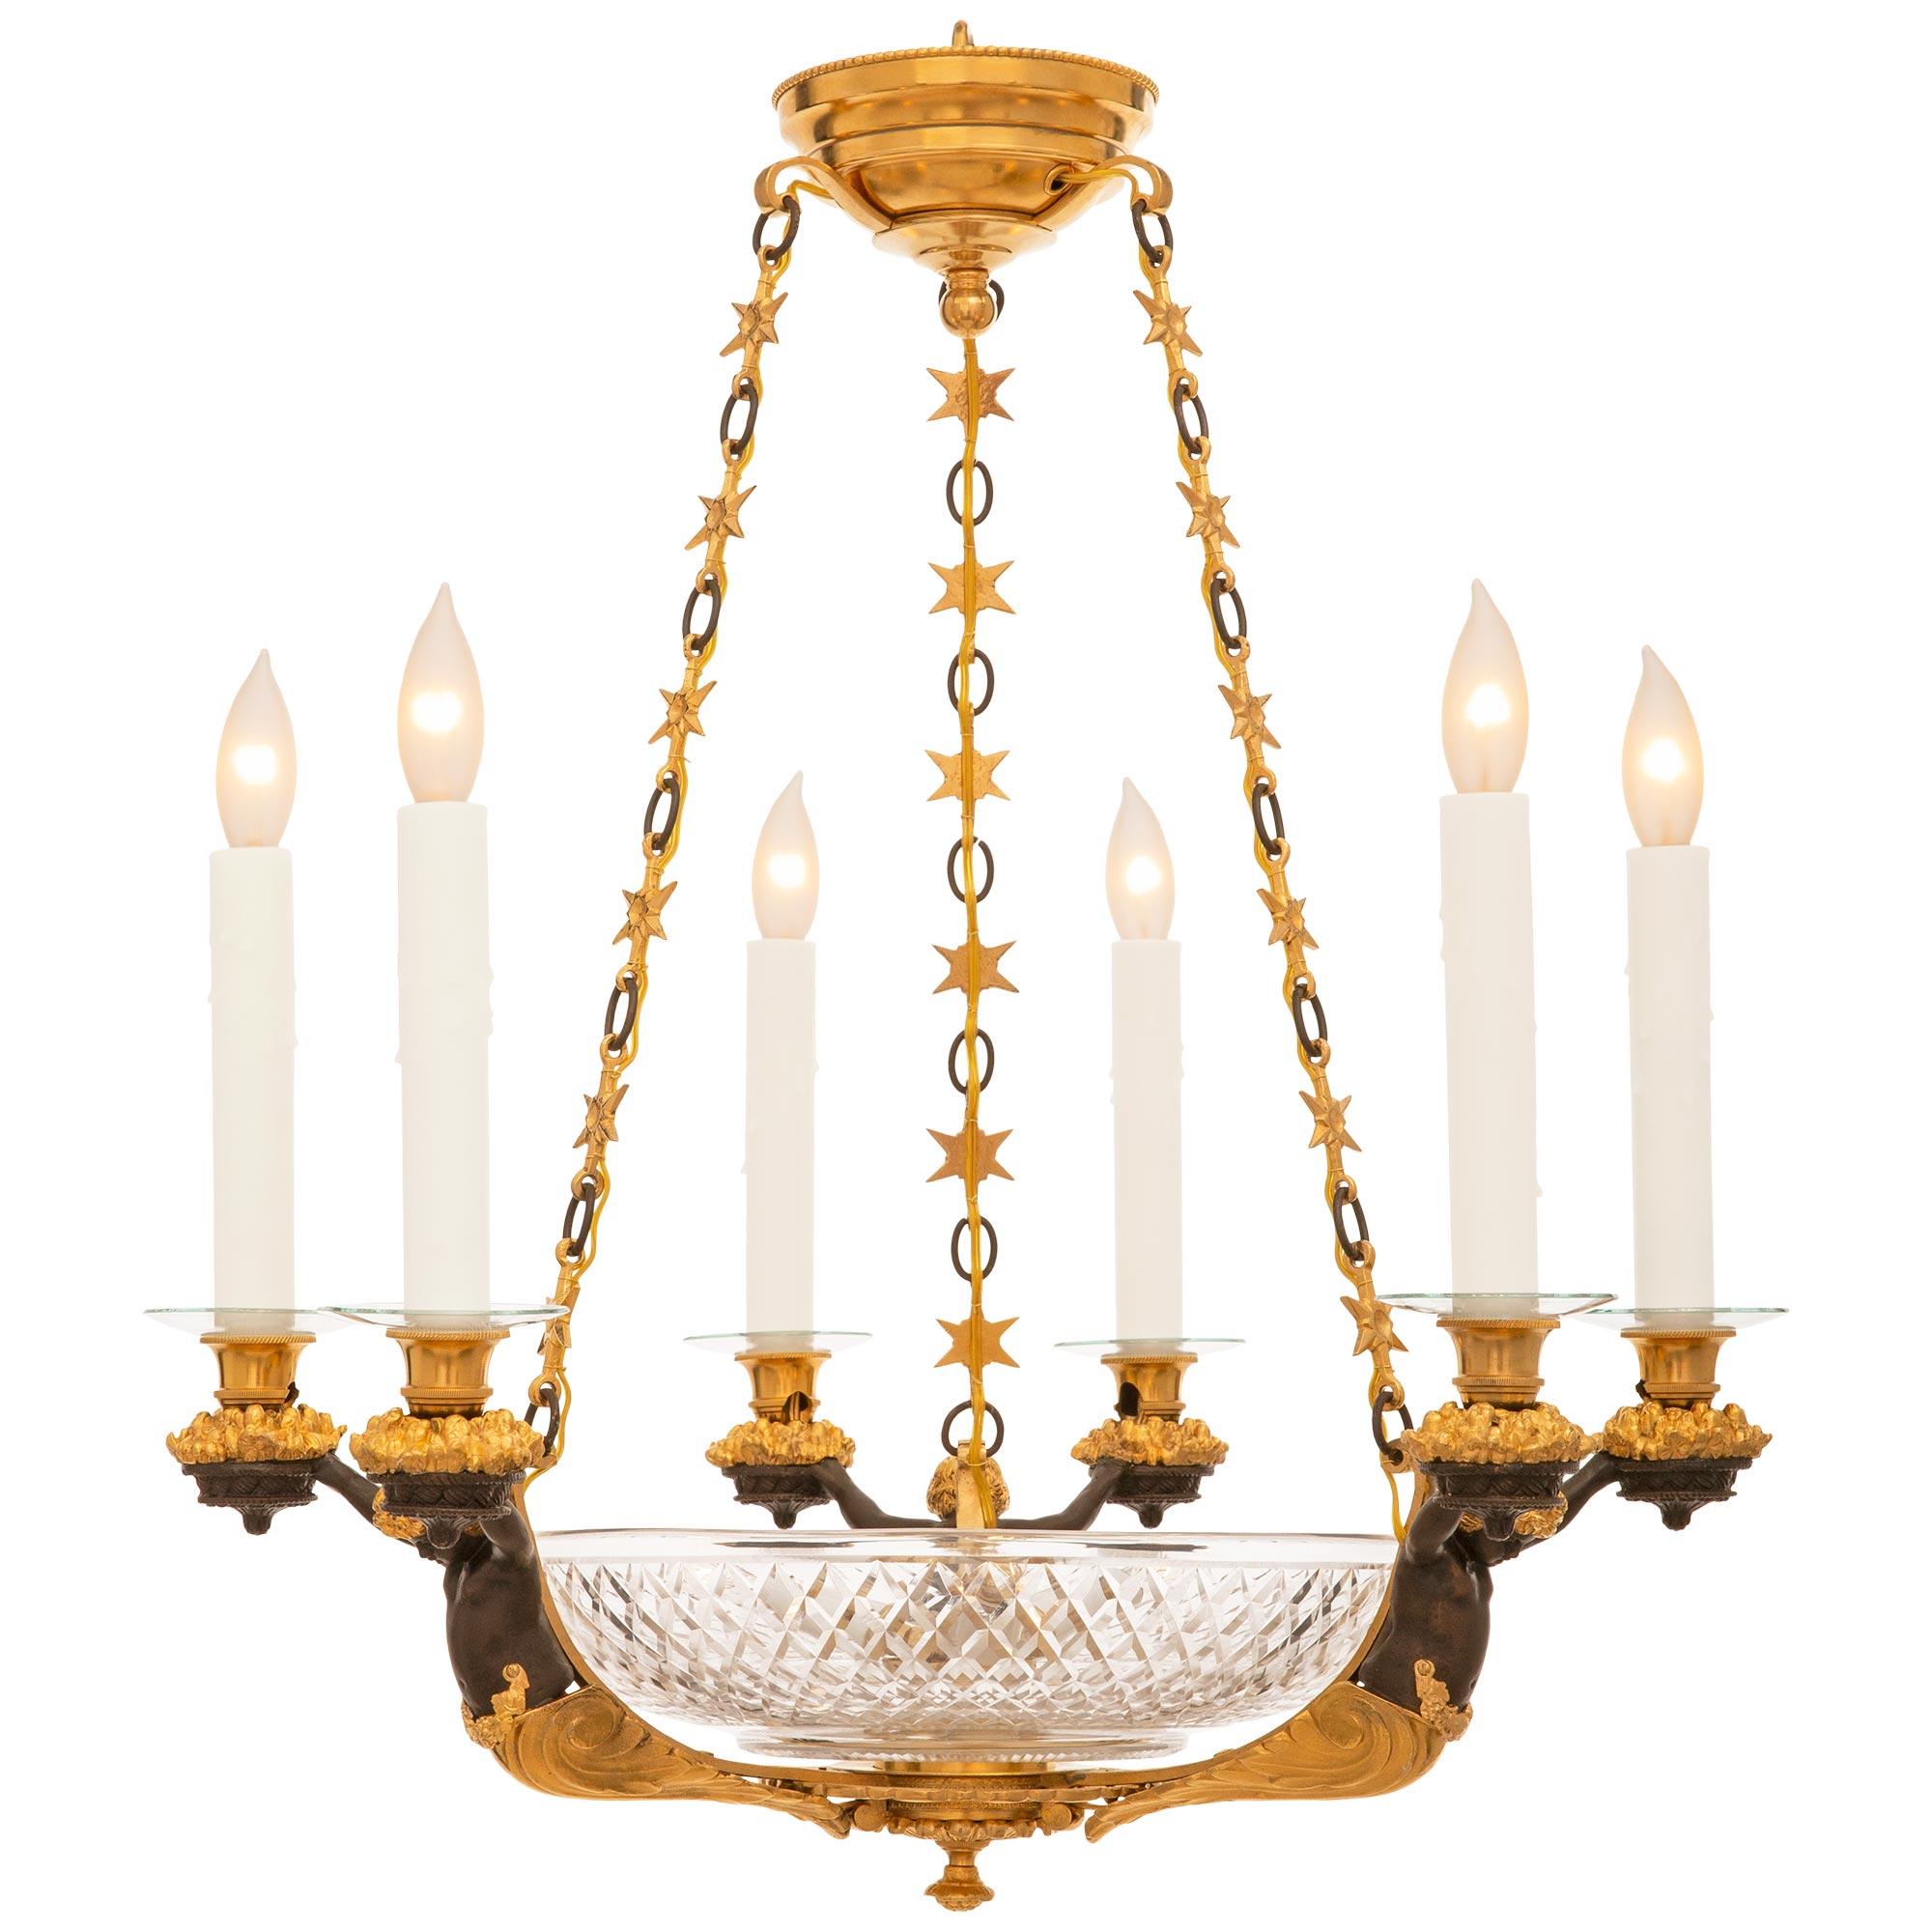 Neoclassical French 19th Century Neo-Classical St. Bronze, Ormolu & Glass Chandelier For Sale